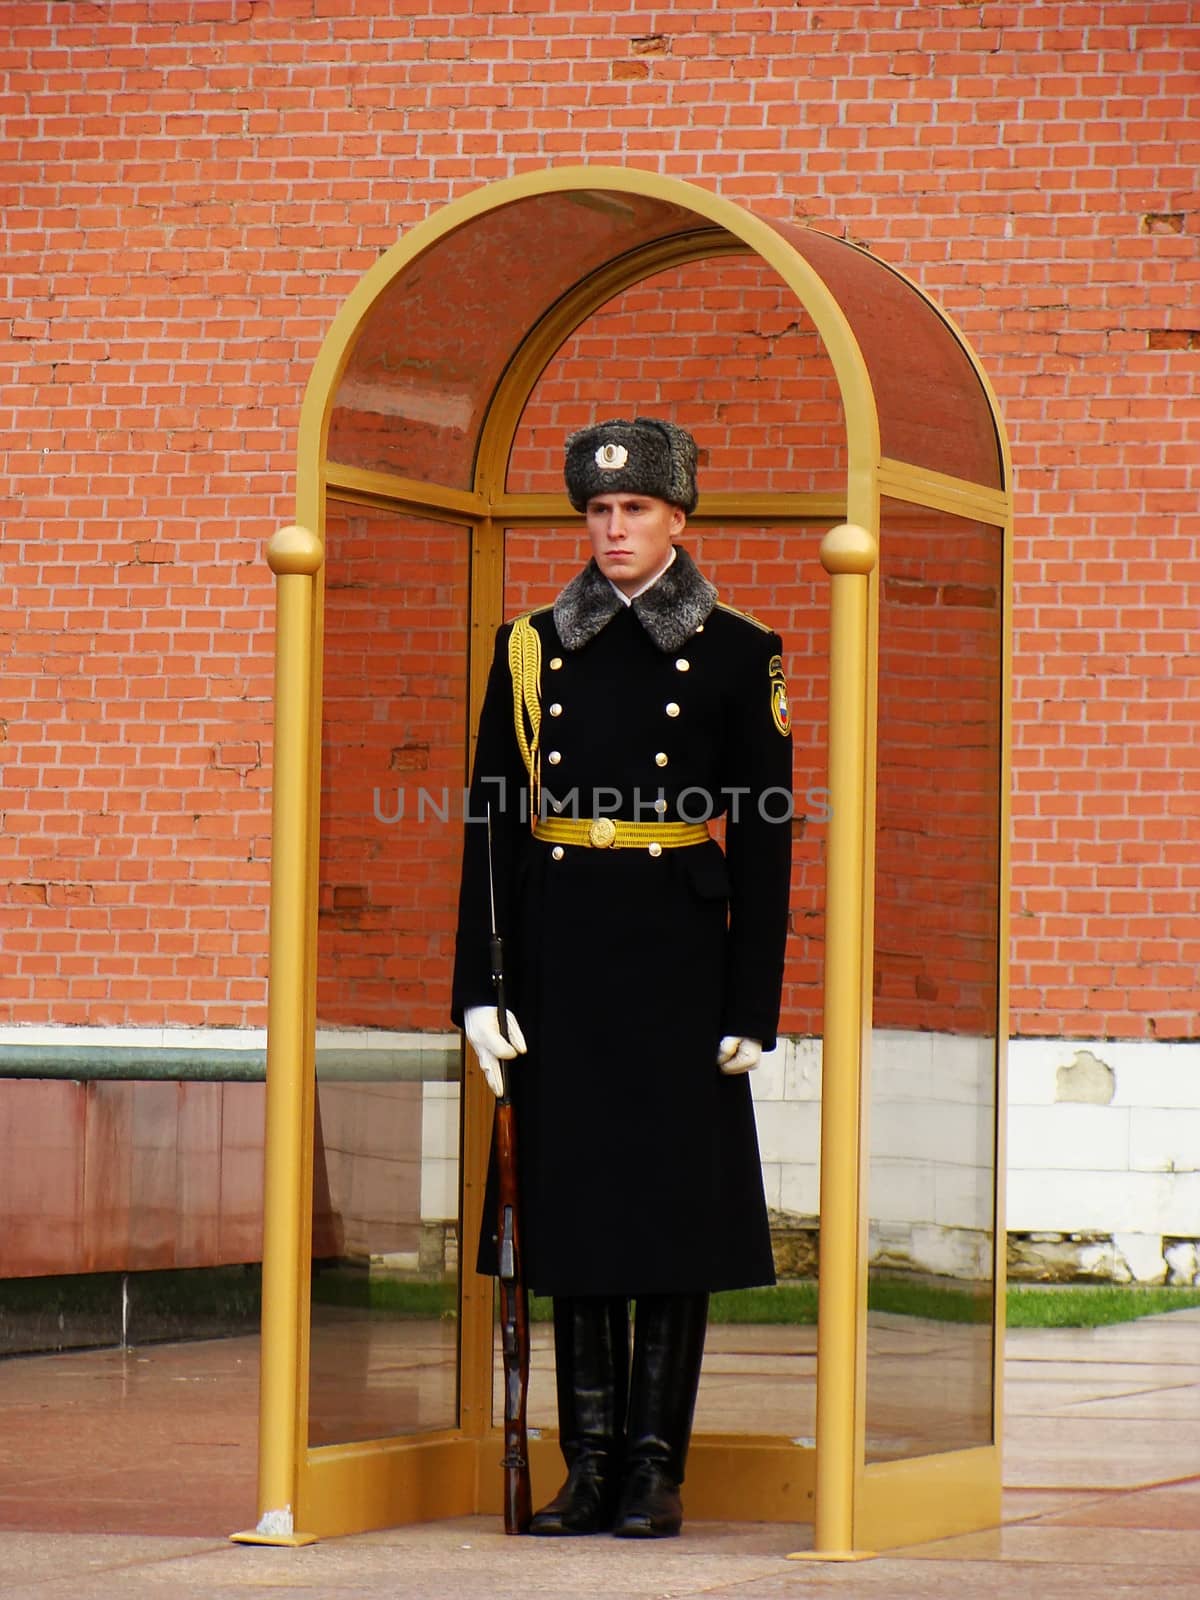 Honor Guard at Tomb of the Unknown Soldier, Moscow, Russia by donya_nedomam